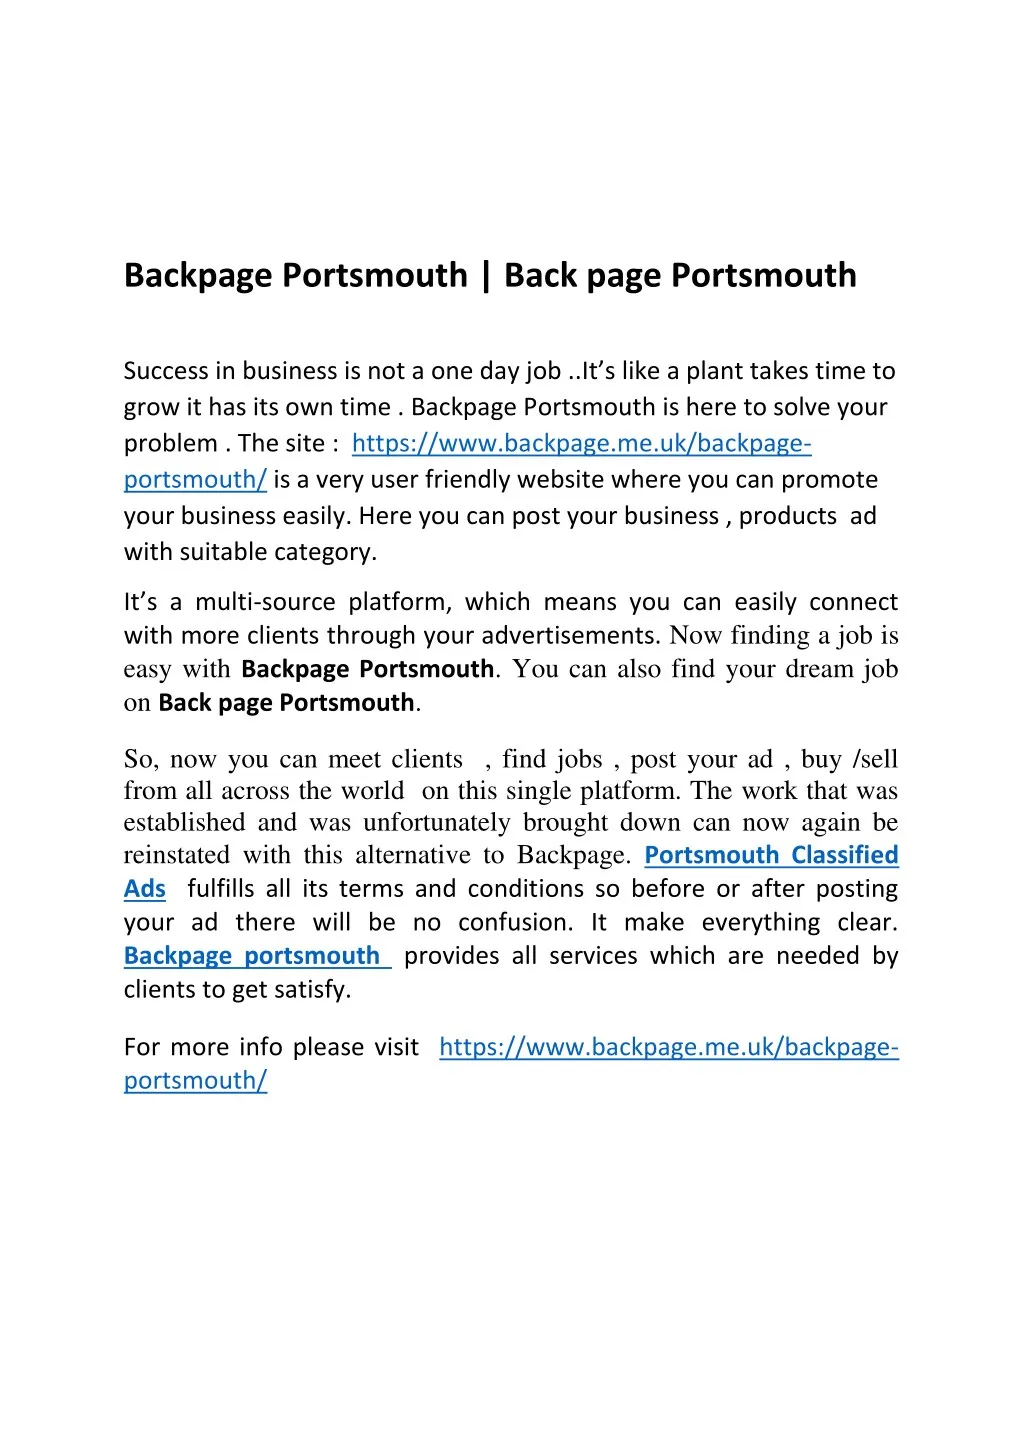 backpage portsmouth back page portsmouth